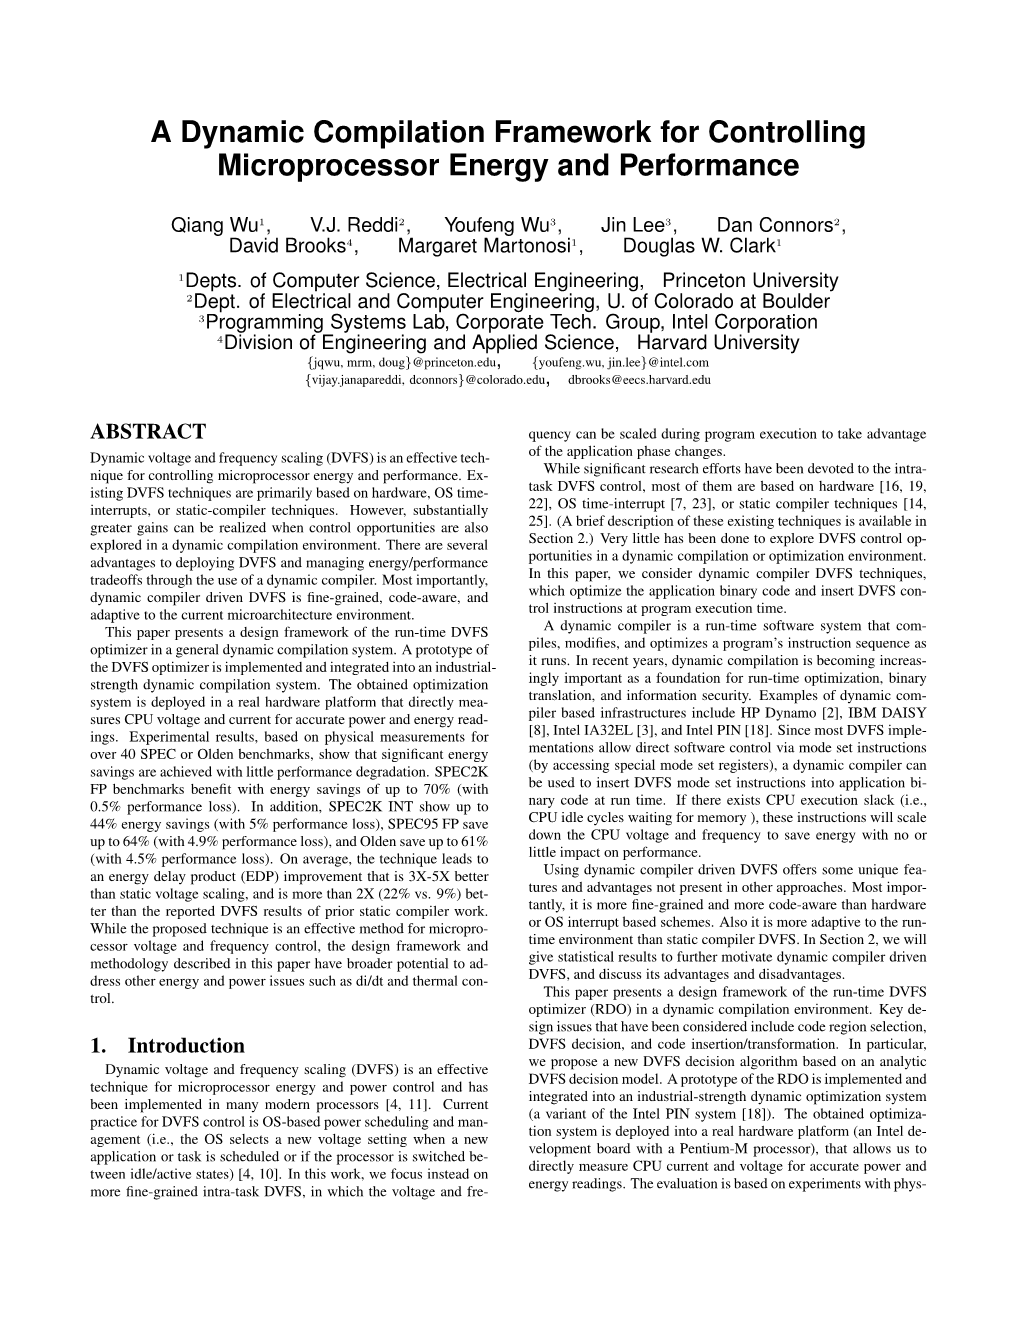 A Dynamic Compilation Framework for Controlling Microprocessor Energy and Performance